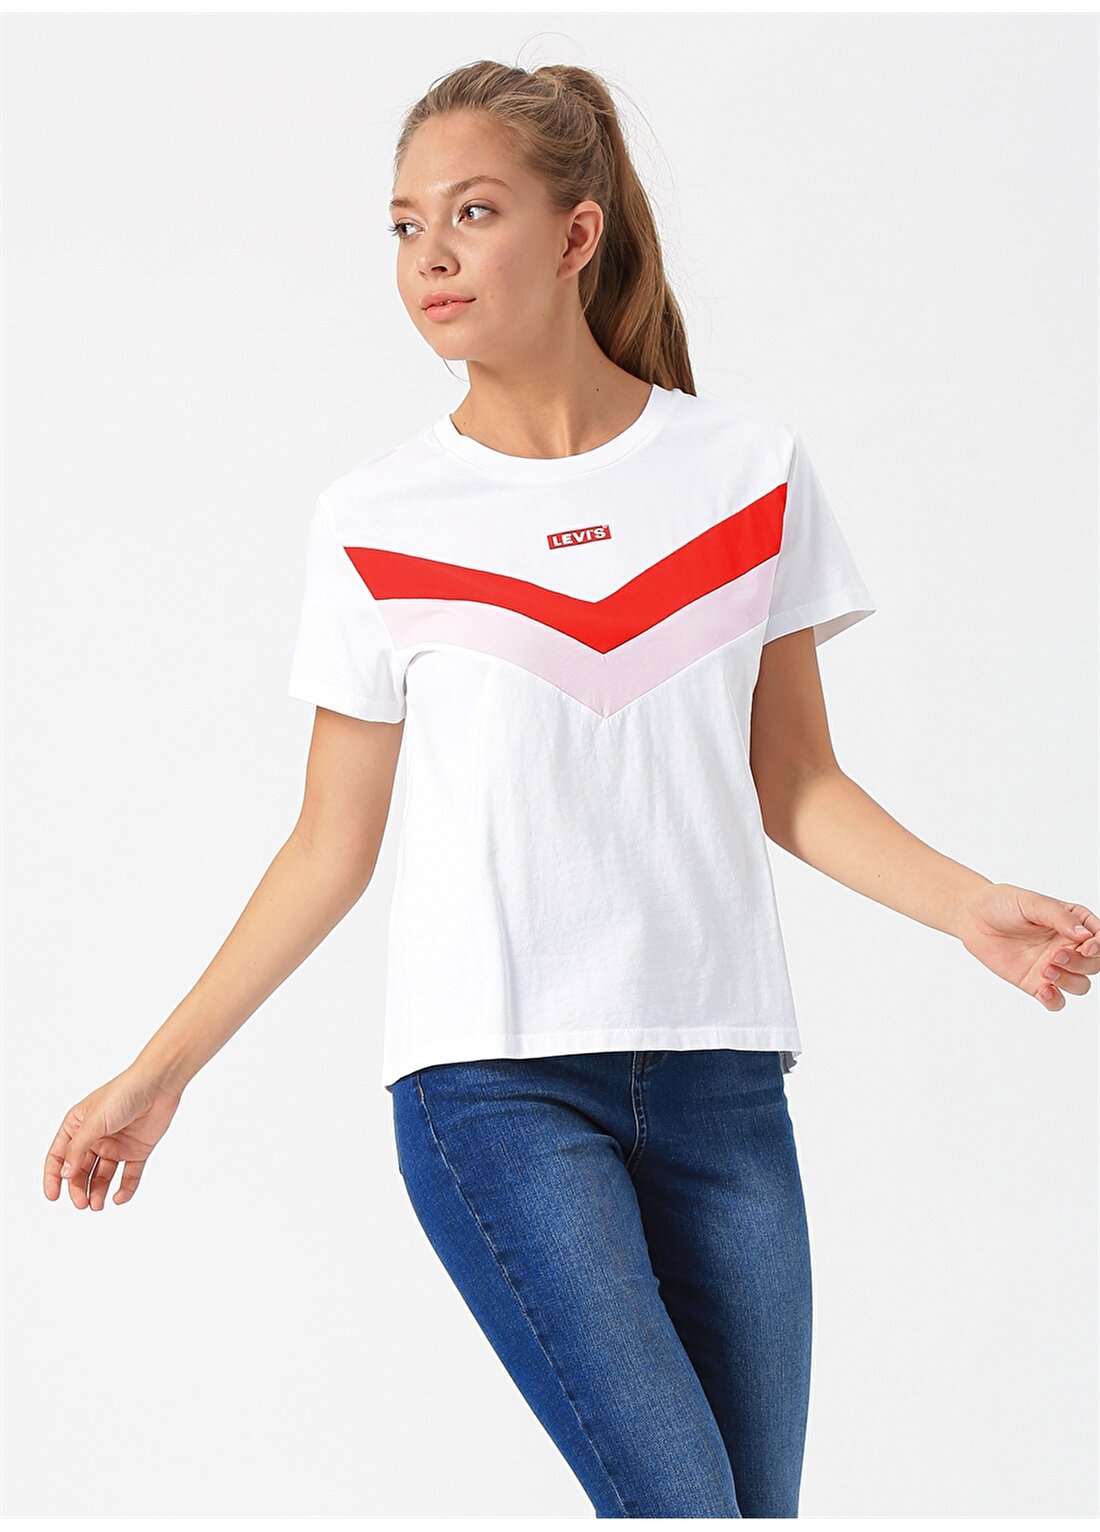 Levis Florence Tee Florence Tee White Graphic T-Shirt